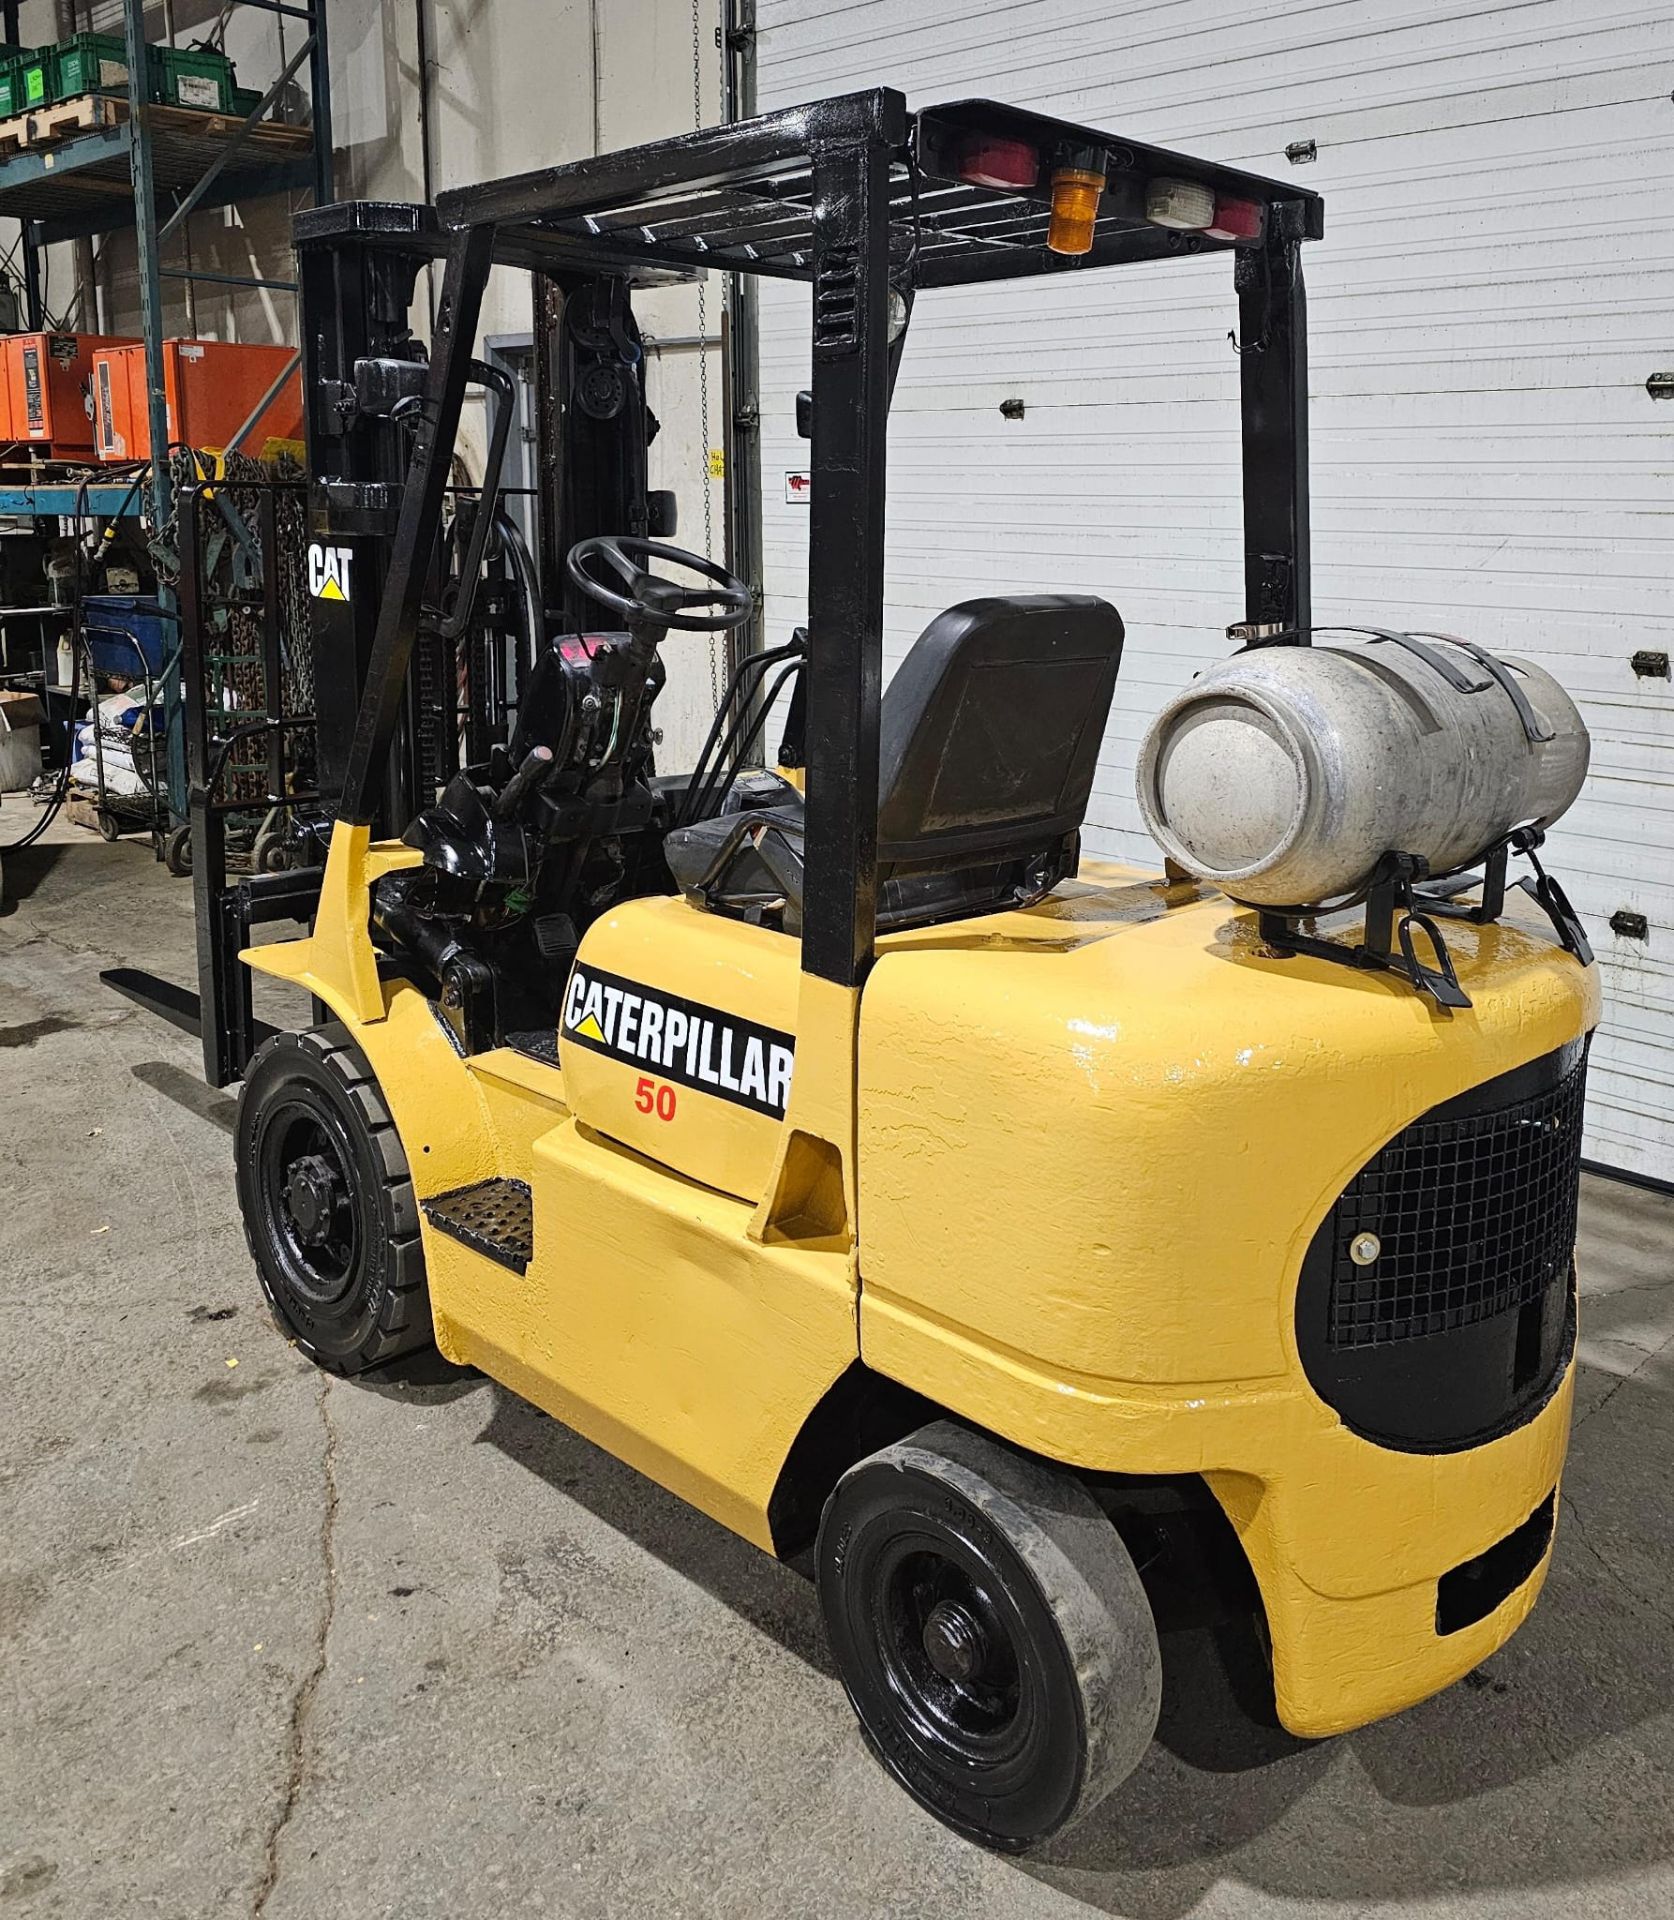 CAT 5,000lbbs Capacity OUTDOOR LPG (propane) Forklift with 3-STAGE MAST sideshift (no propane tank